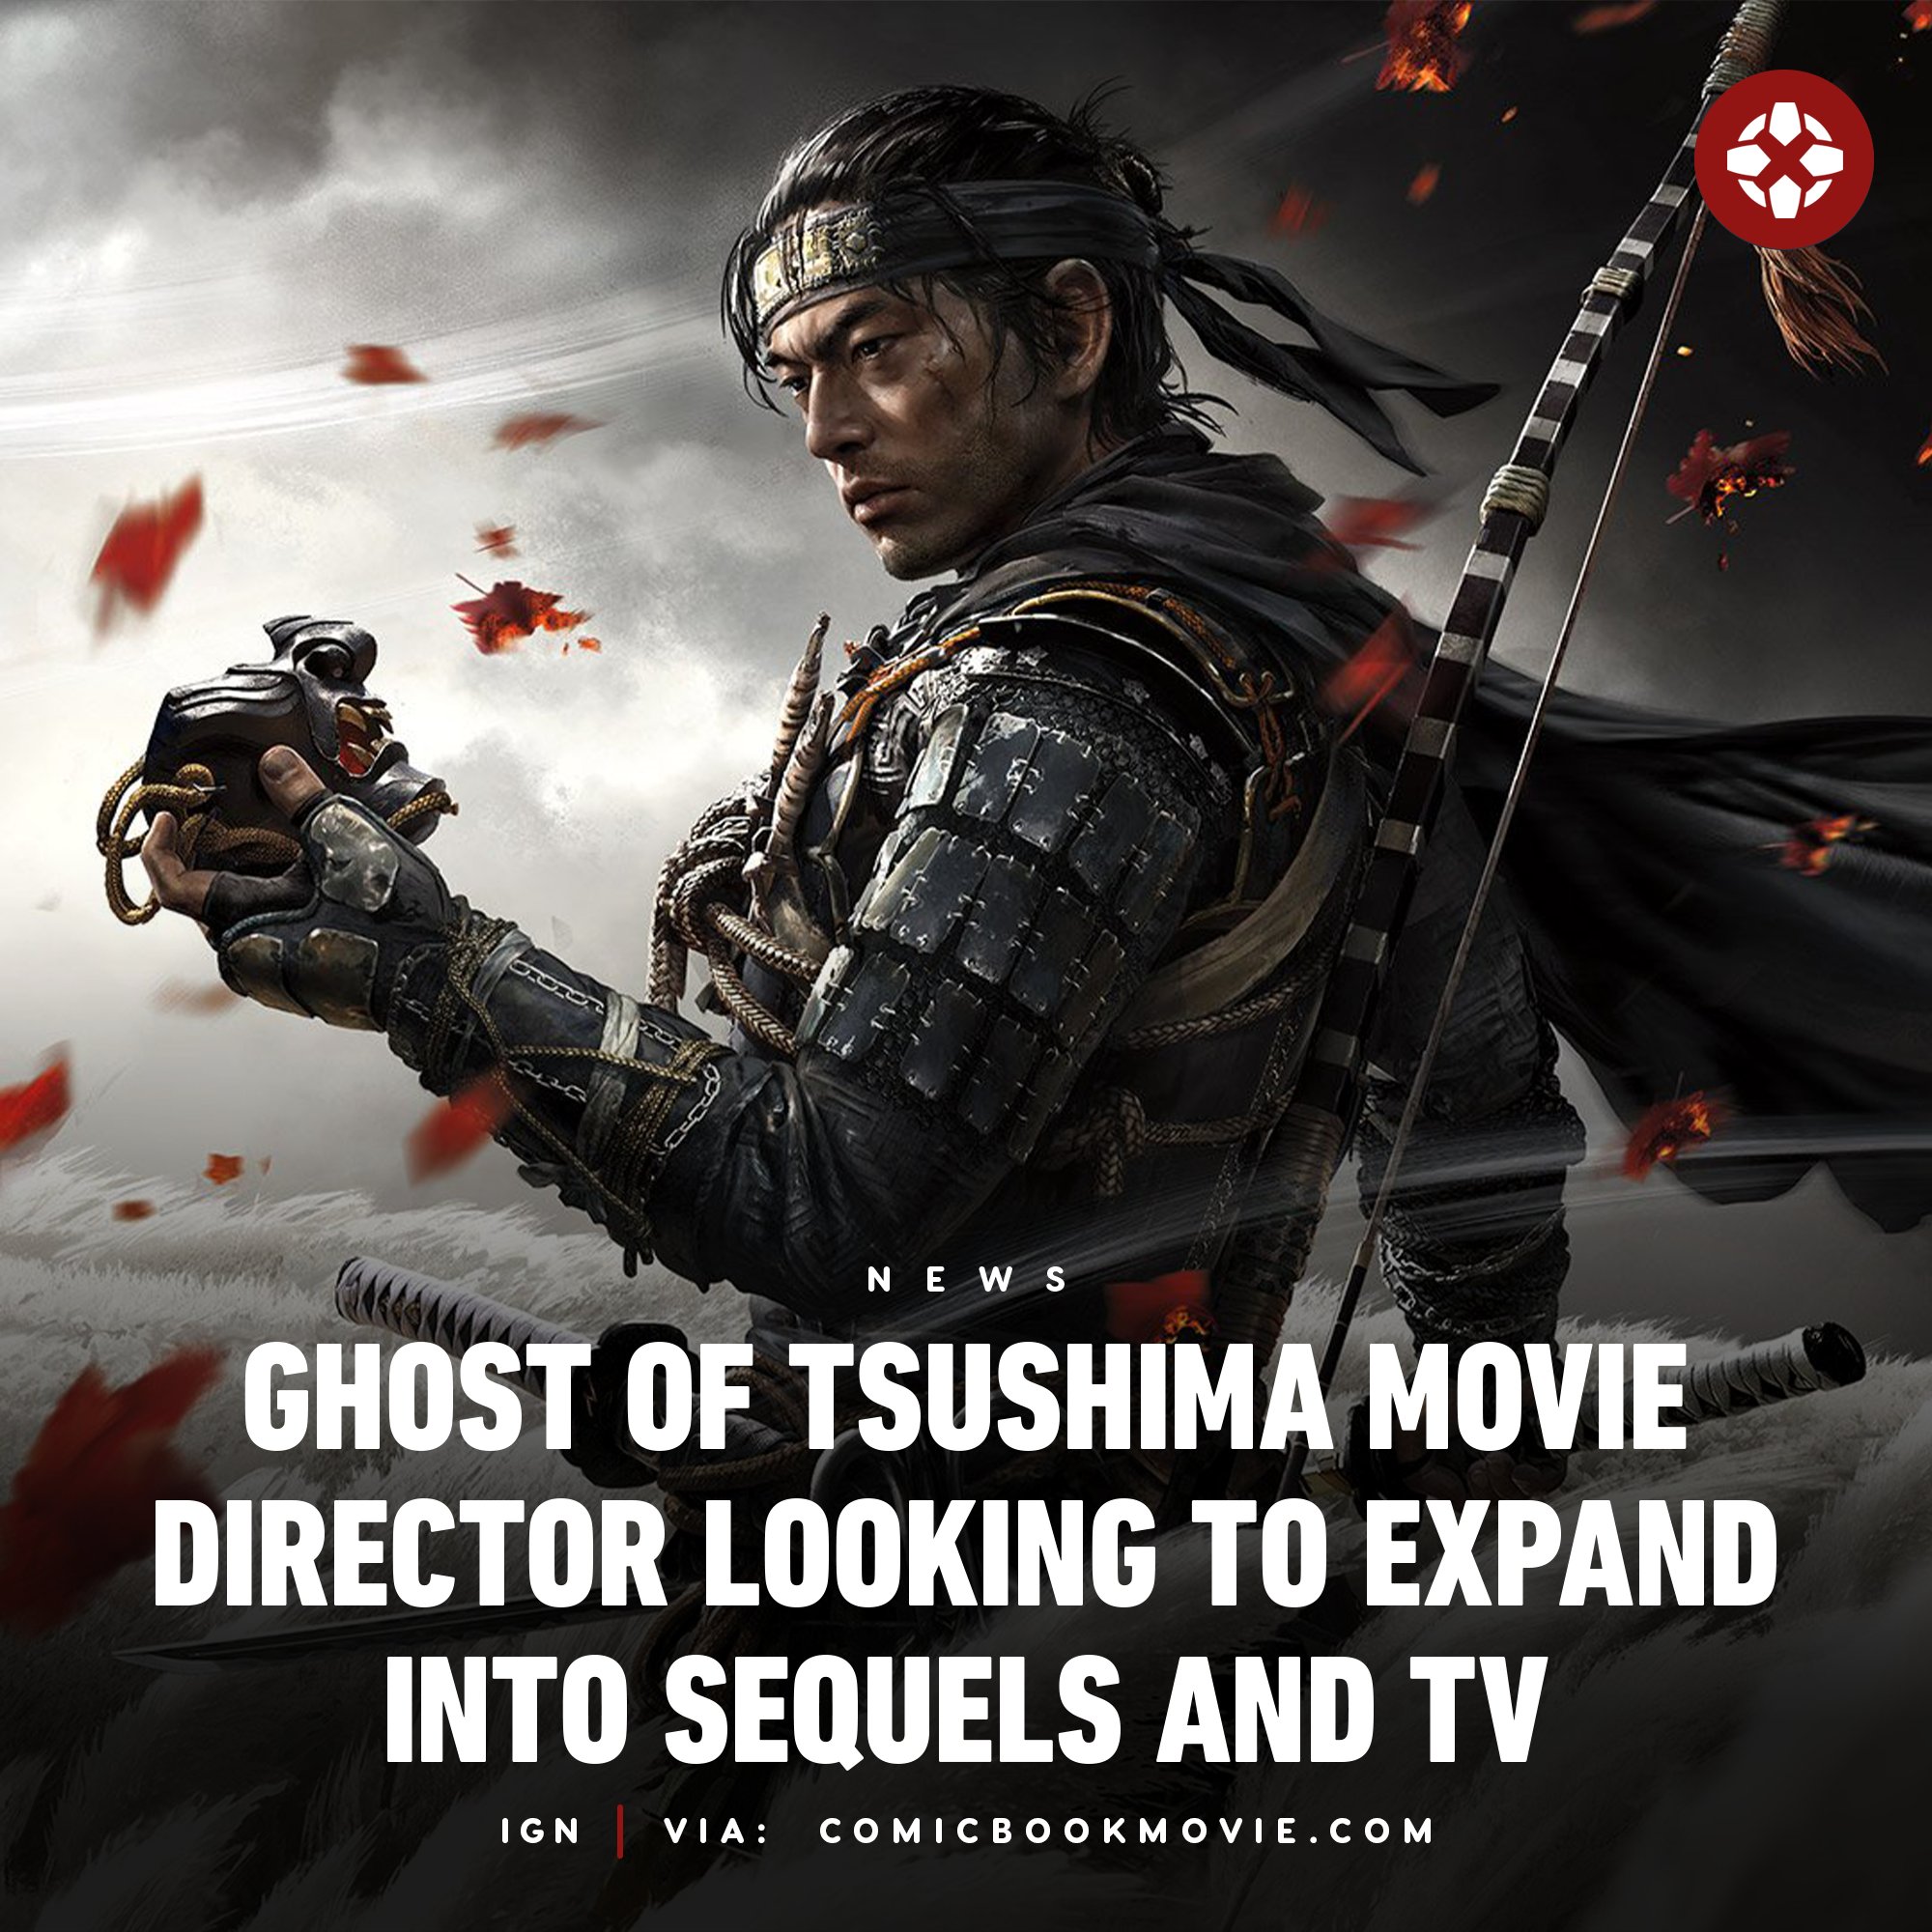 Ghost of Tsushima' Movie In The Works With 'John Wick' Director – Deadline